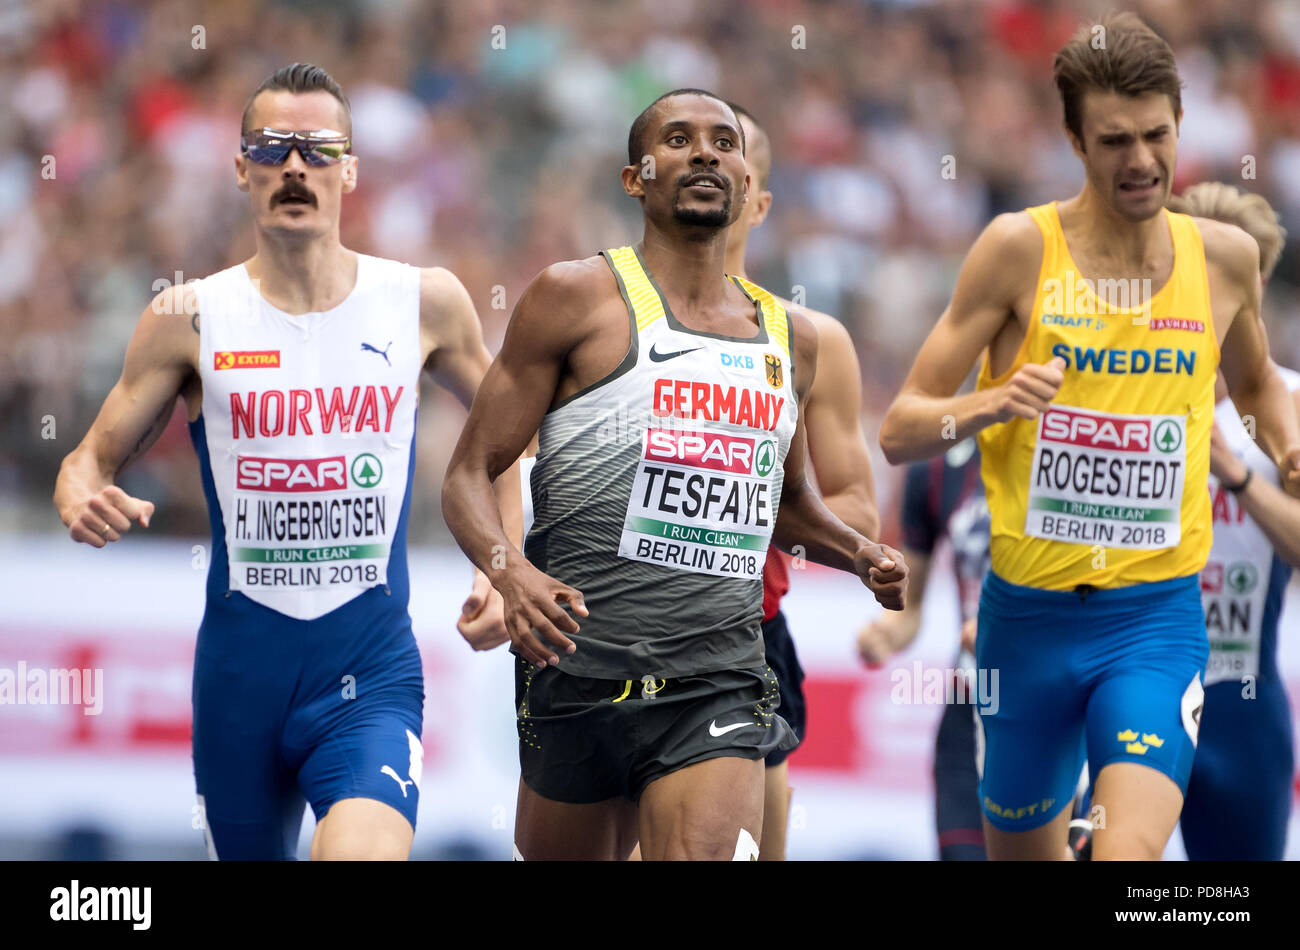 Berlin, Germany. 08th Aug, 2018. 08.08.2018, Berlin: Athletics: European Championships in the Olympic Stadium: 1500m, heat, Men: Henrik Ingebrigtsen (l-r) from Norway, Homiyu Tesfaye from Germany and Johan Rogestedt from Sweden in action. Credit: Sven Hoppe/dpa/Alamy Live News Stock Photo